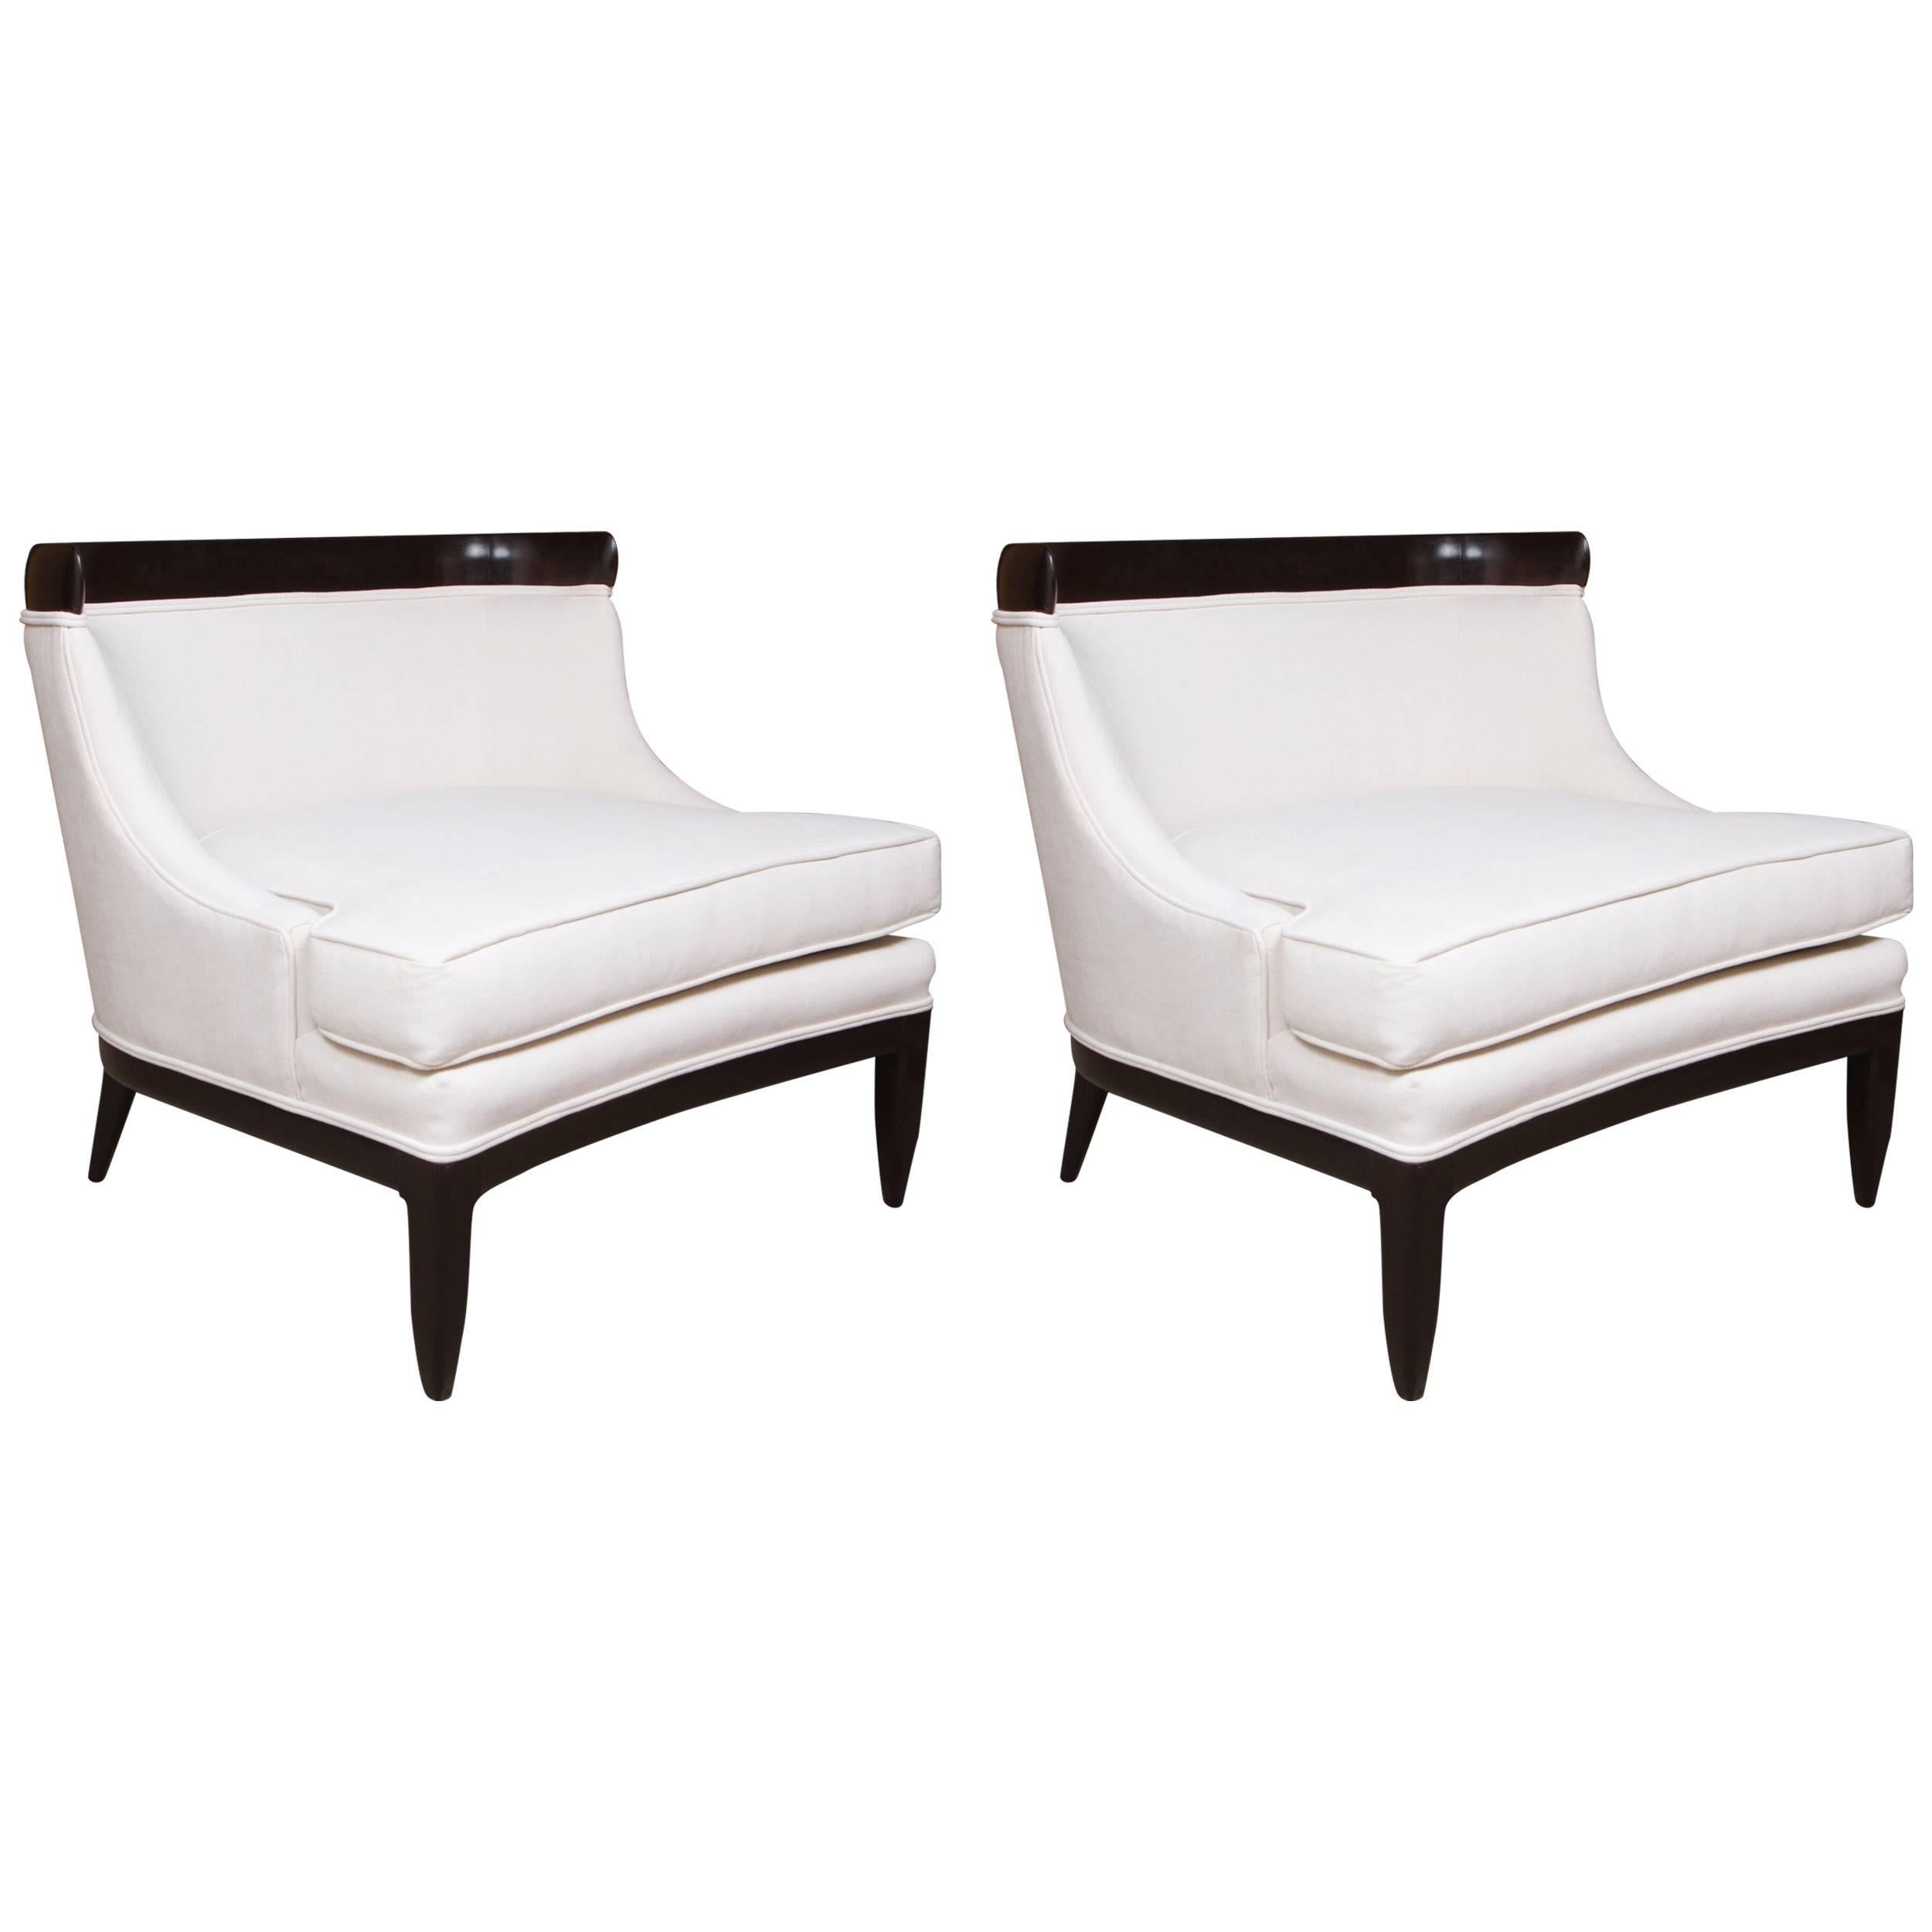 Pair of Lounges Chairs by Erwin Lambeth for Tomlinson